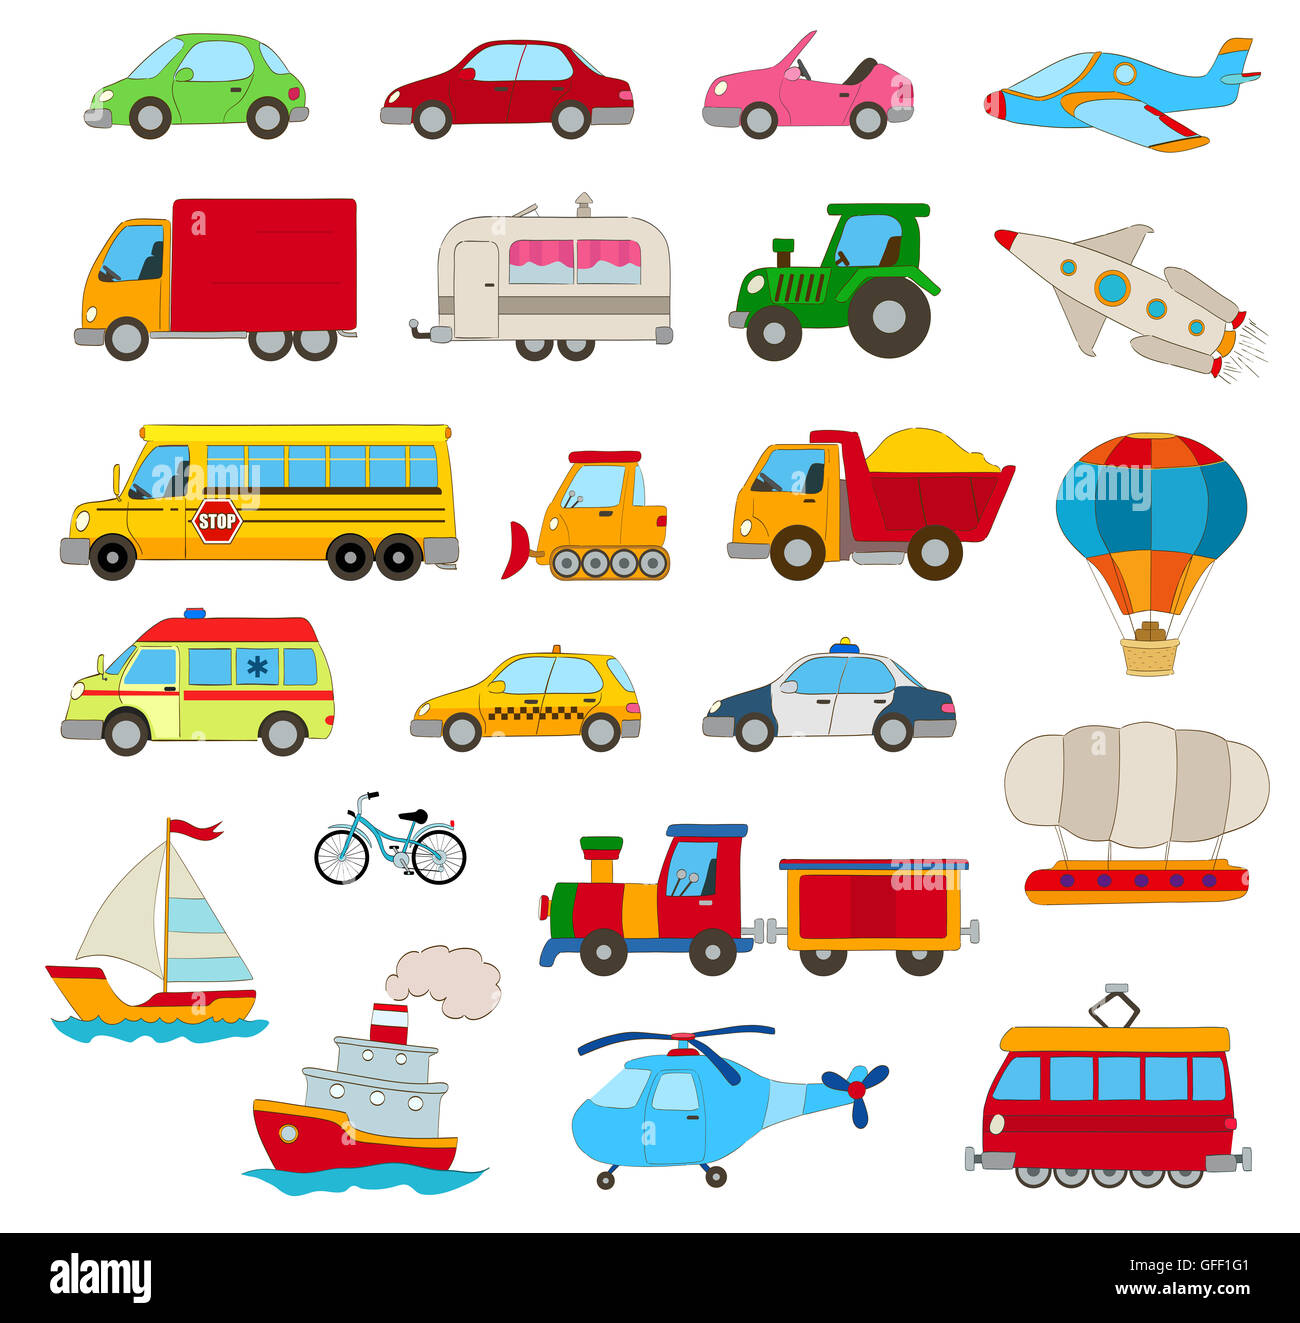 Cartoon cars Cut Out Stock Images & Pictures - Alamy